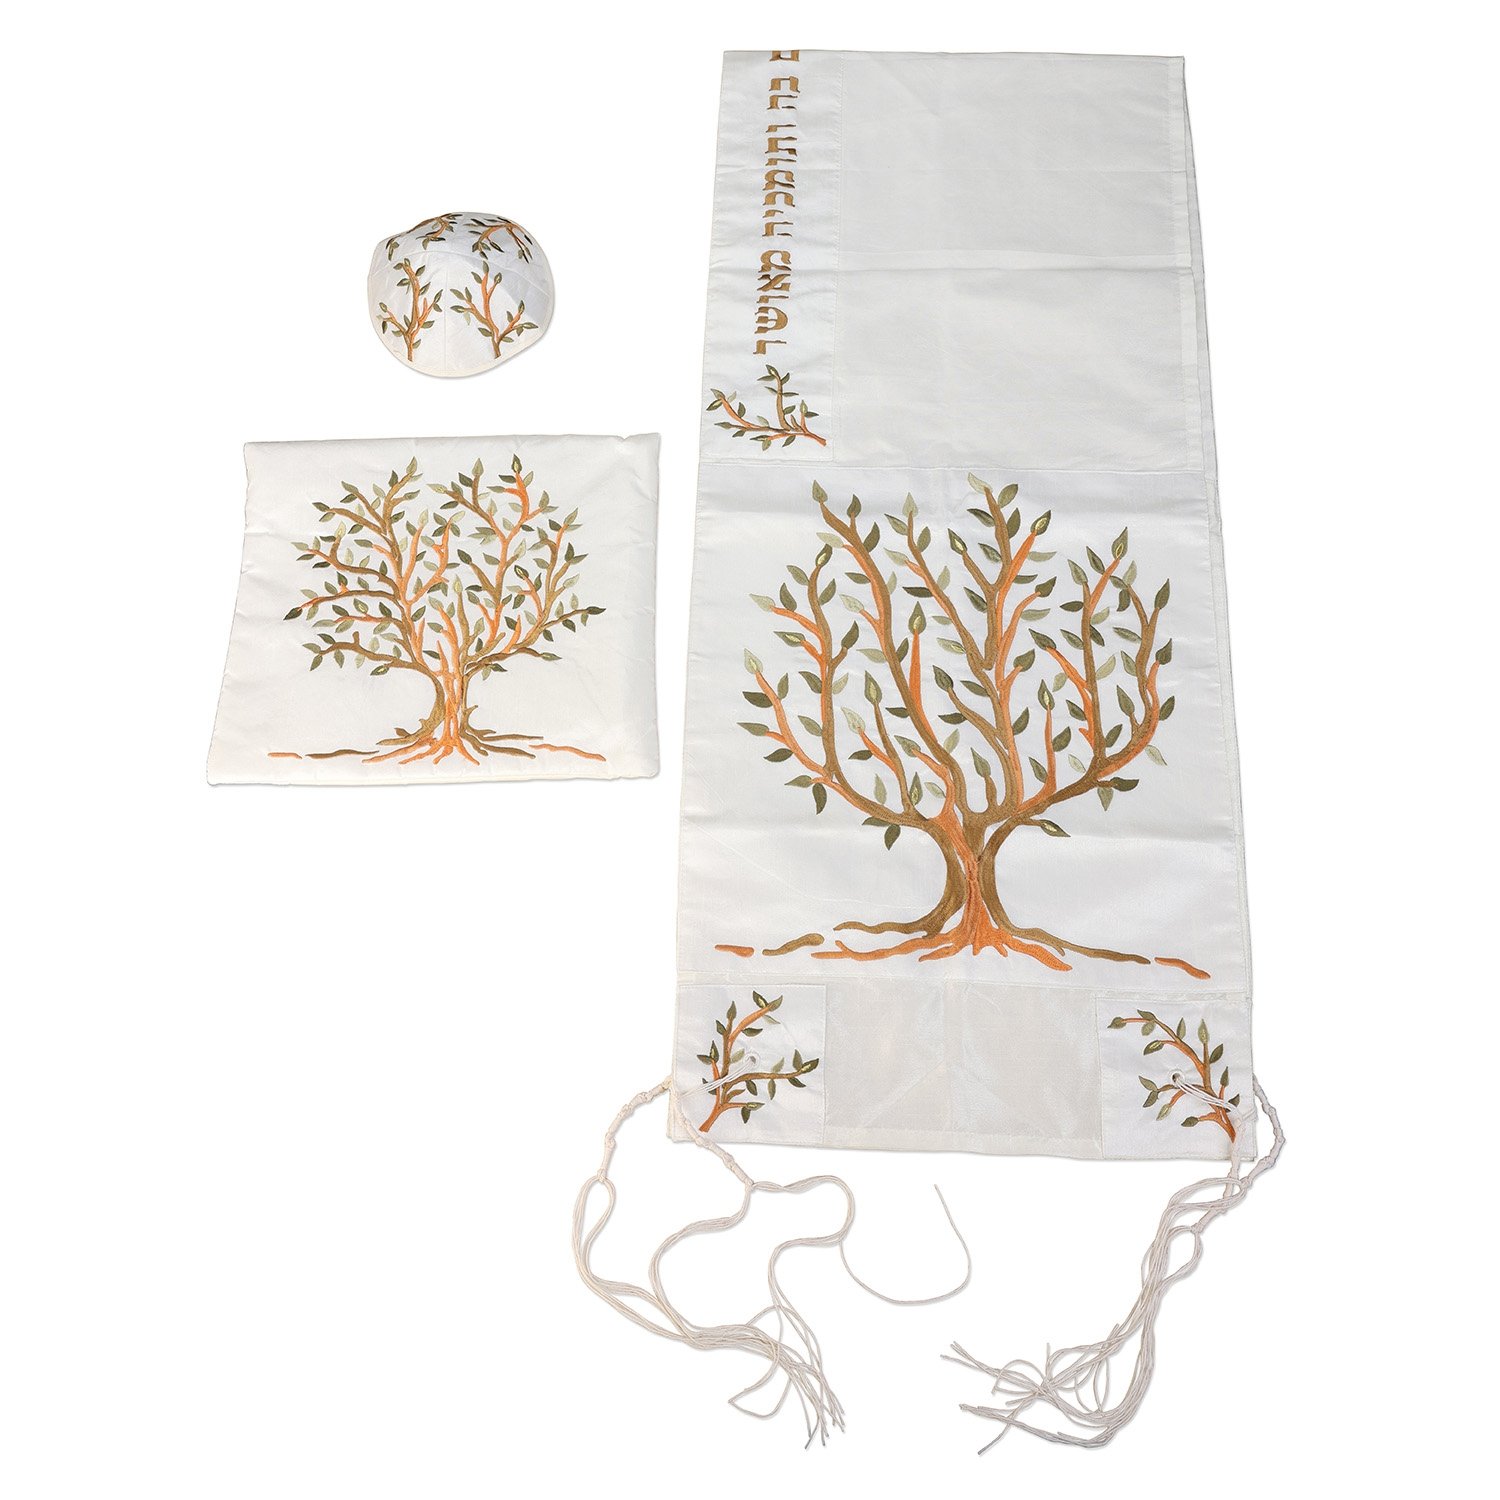  Yair Emanuel Women's Embroidered Tree of Life Poly Silk Prayer Shawl (Brown) - 1